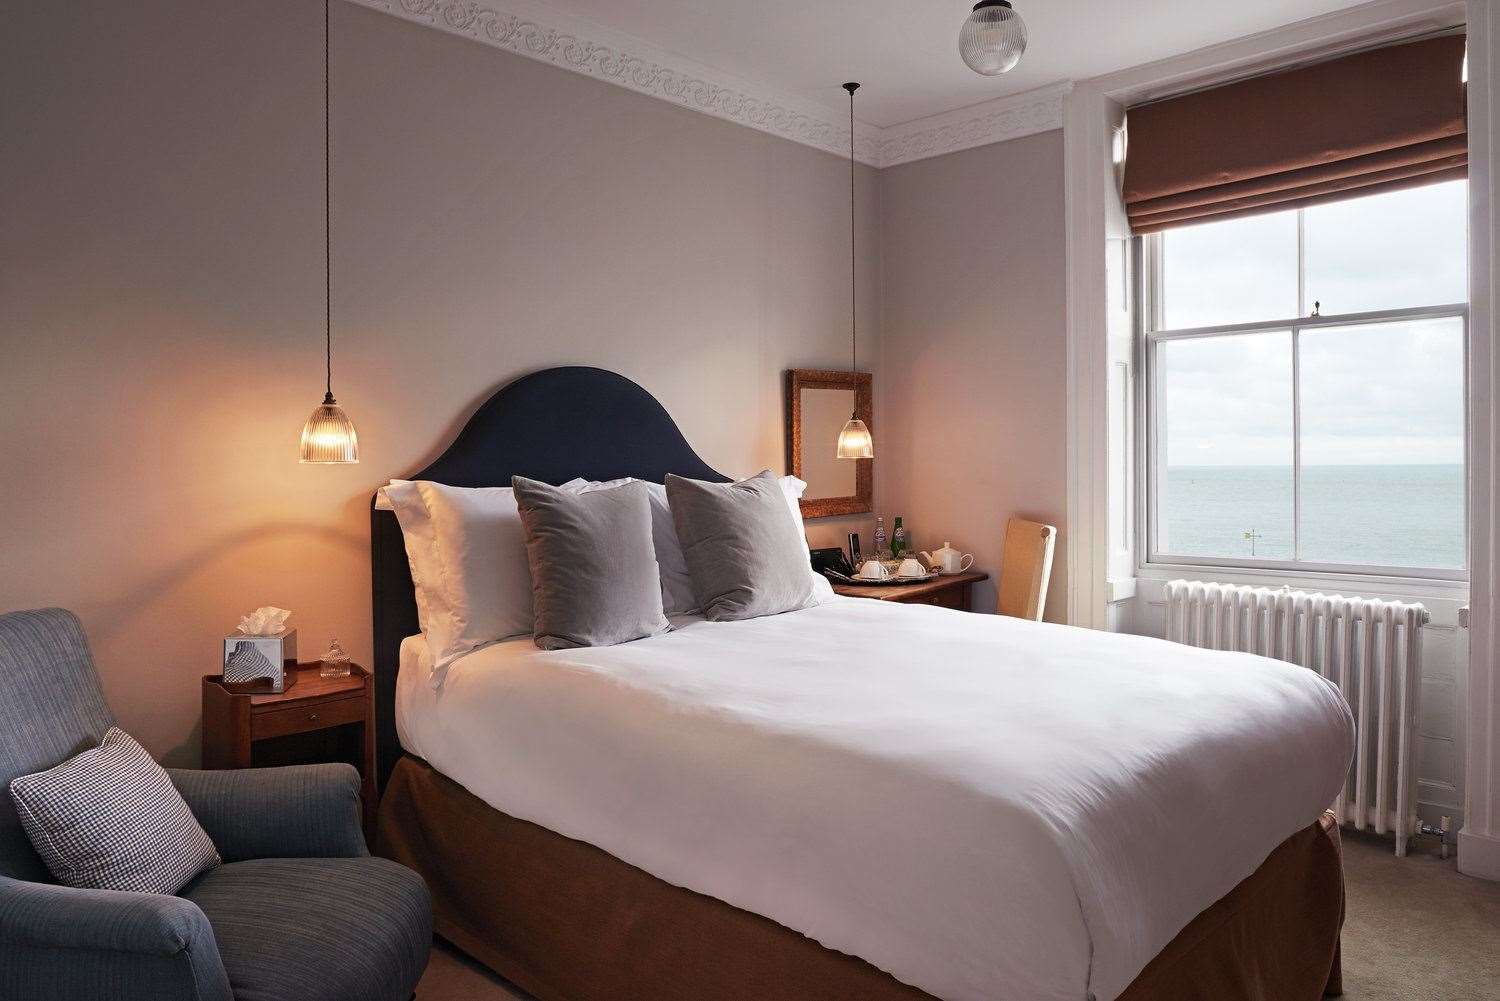 Albion House, with its views of the beach and harbour, made it into the Good Hotel Guide.  Picture: Albion House